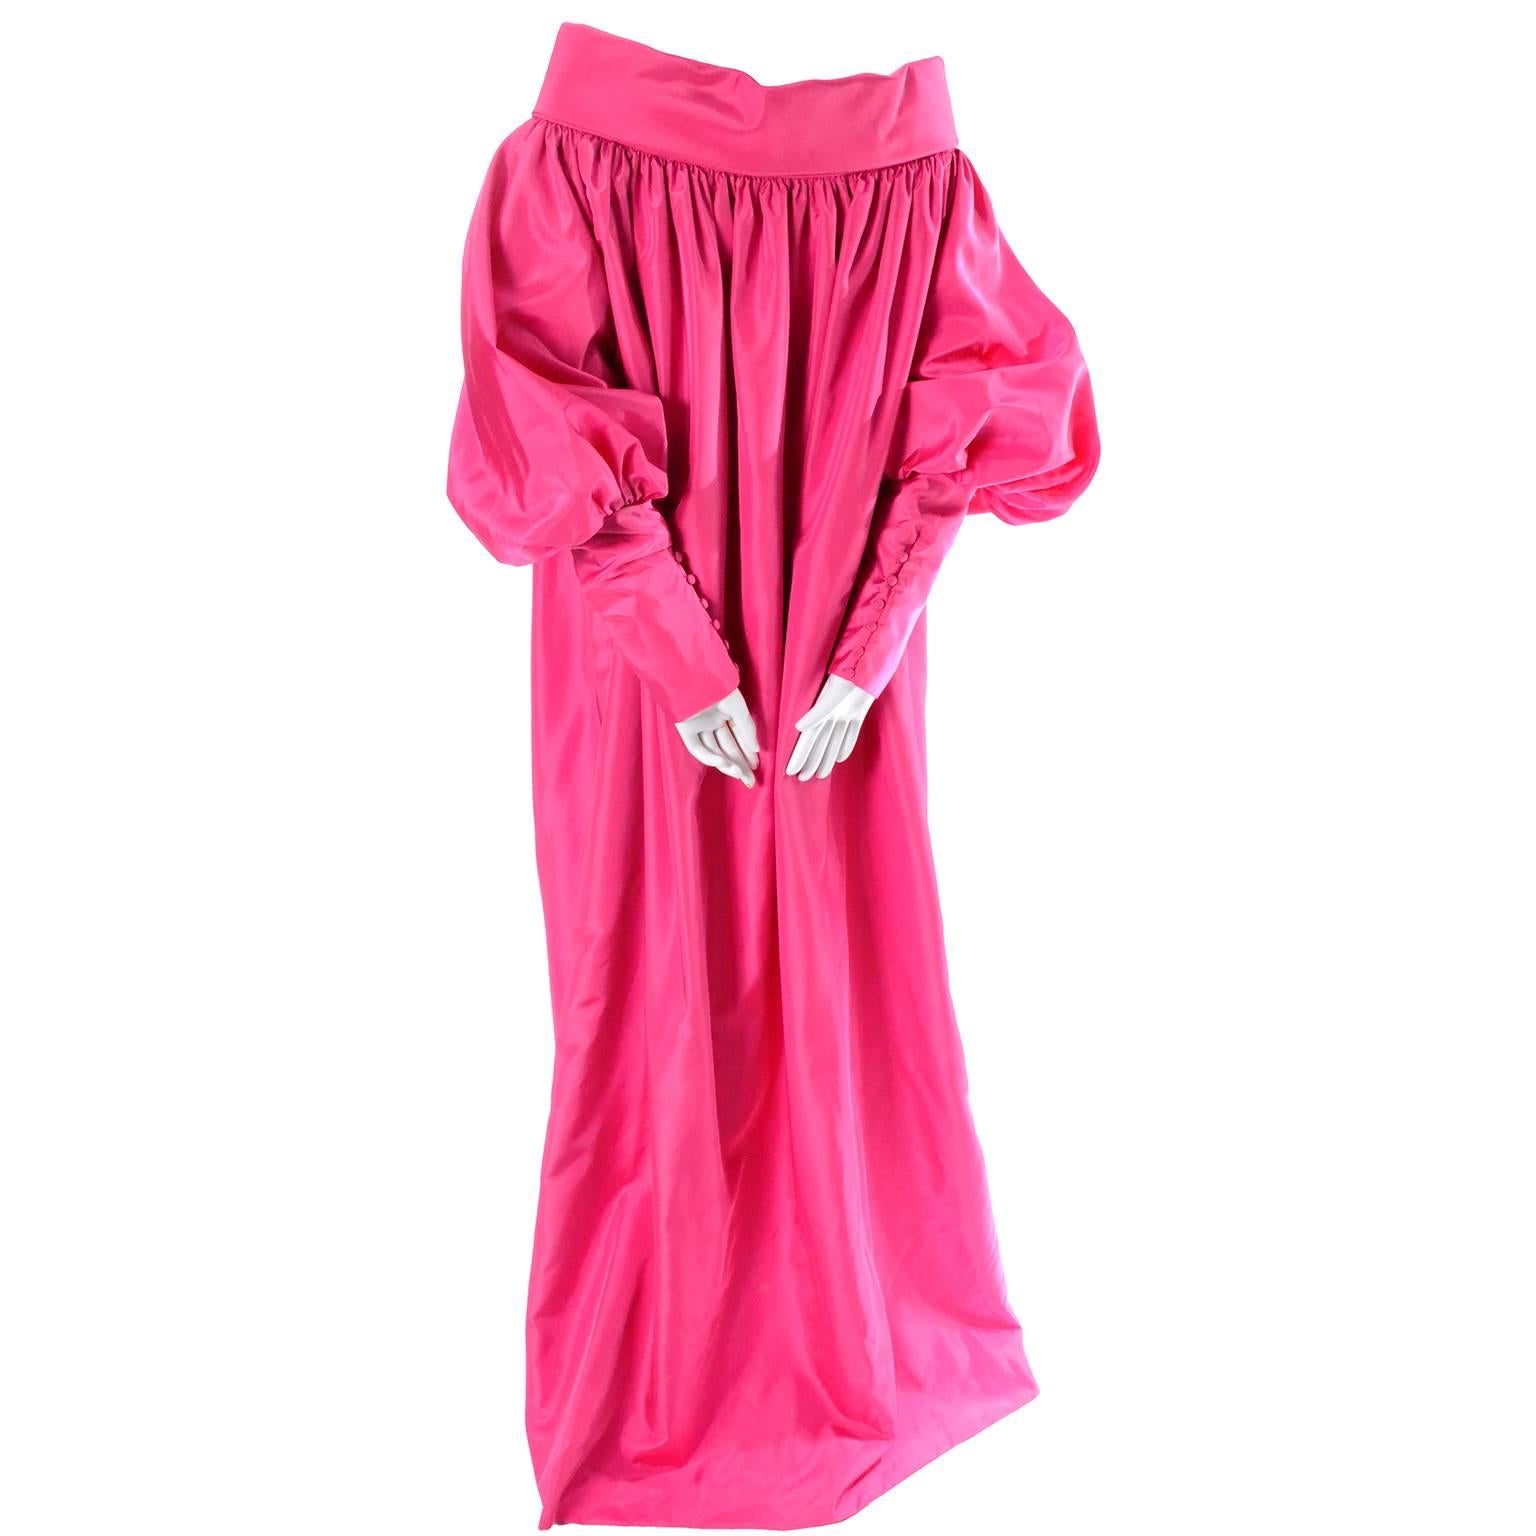 This exquisite pink satin evening coat is stunning and has incredible statement sleeves with 9 and 1/2